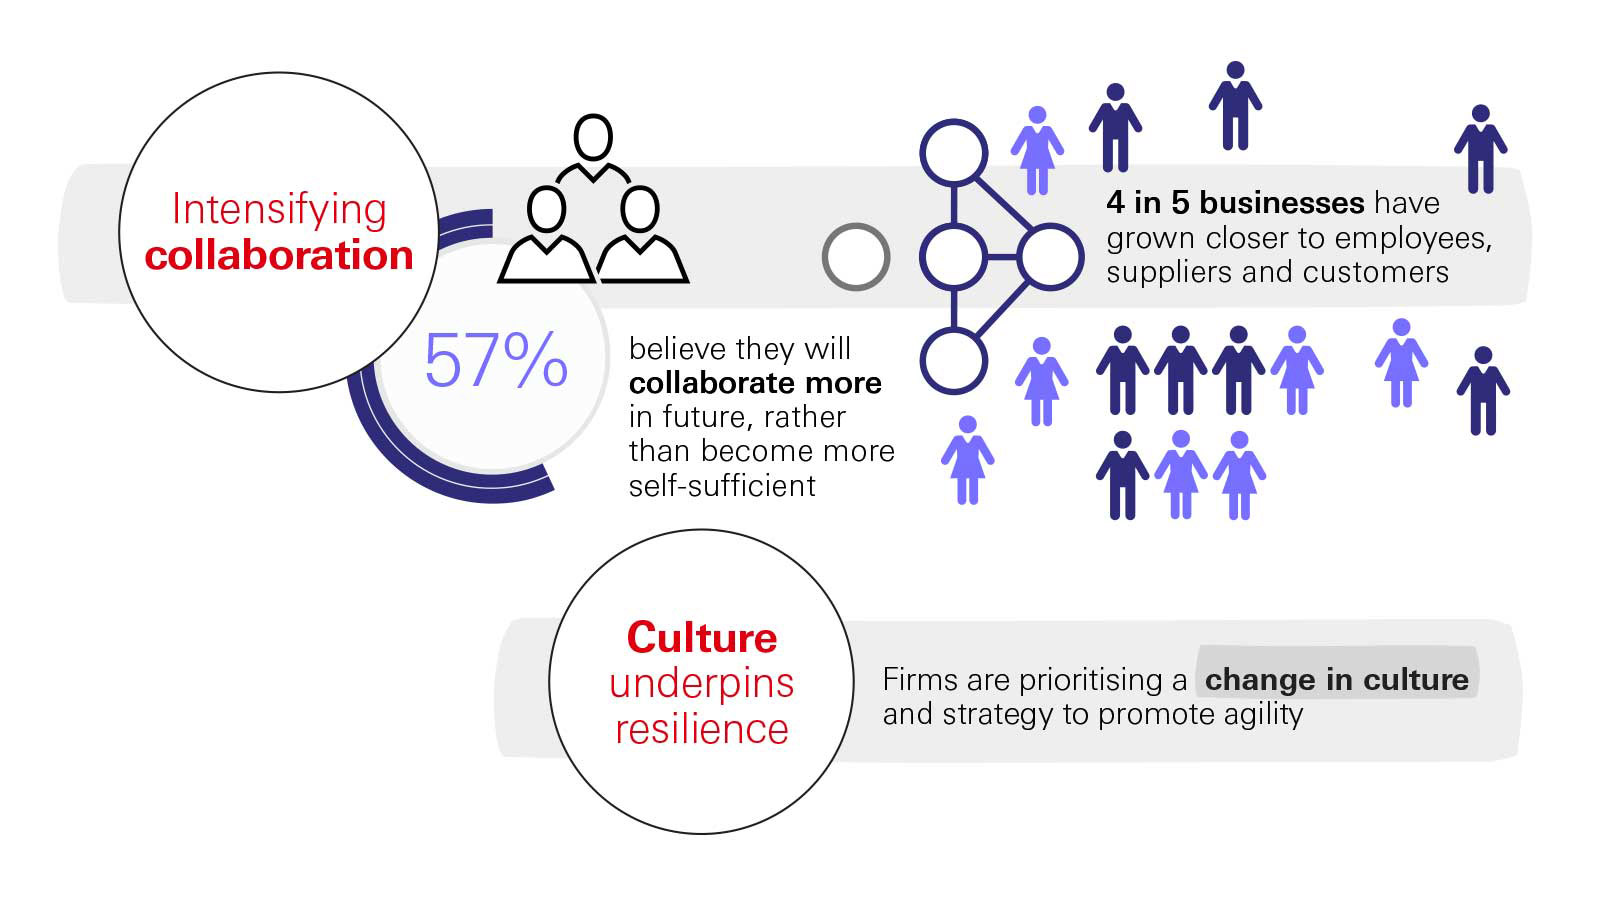 Intensifying collaboration: 57 per cent of those surveyed believe they will collaborate more in future, rather than become more self-sufficient. Four in five businesses have grown closer to employees, suppliers and customers. Finally, firms are prioritising a change in culture and strategy to promote agility.